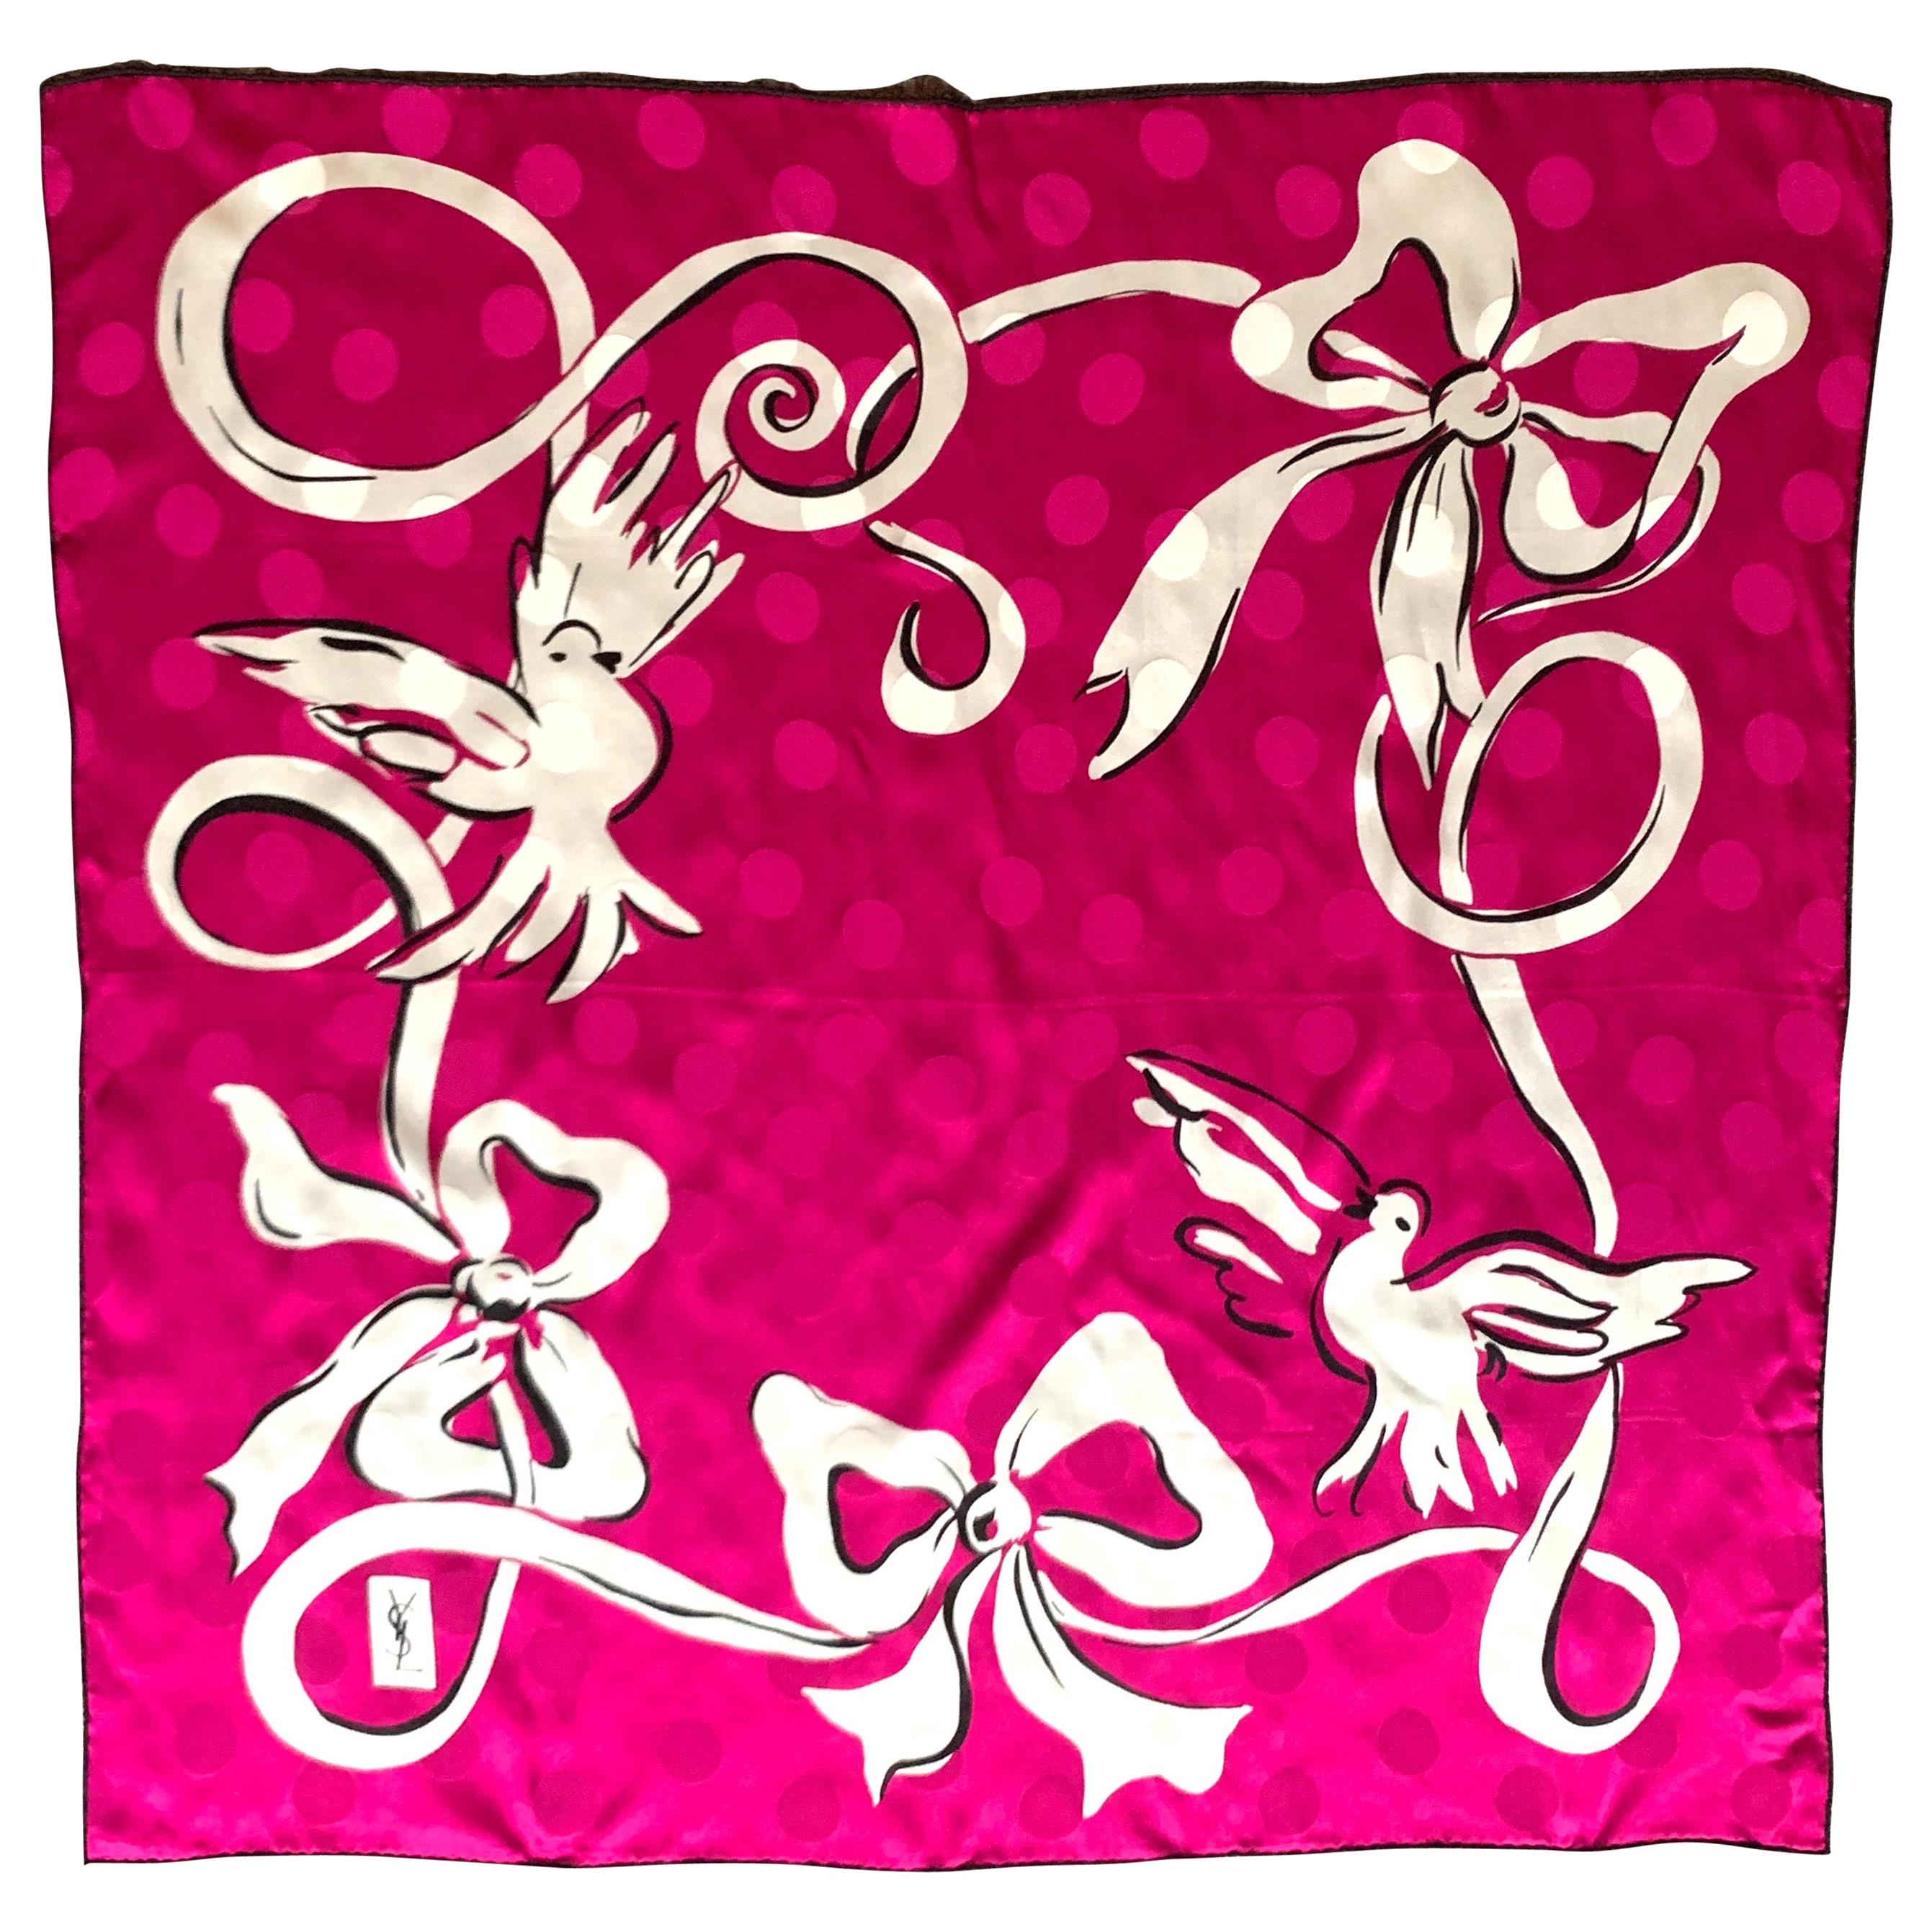 Yves Saint Laurent Vintage Silk Scarf in Fuchsia Pink Dove and Ribbon Print